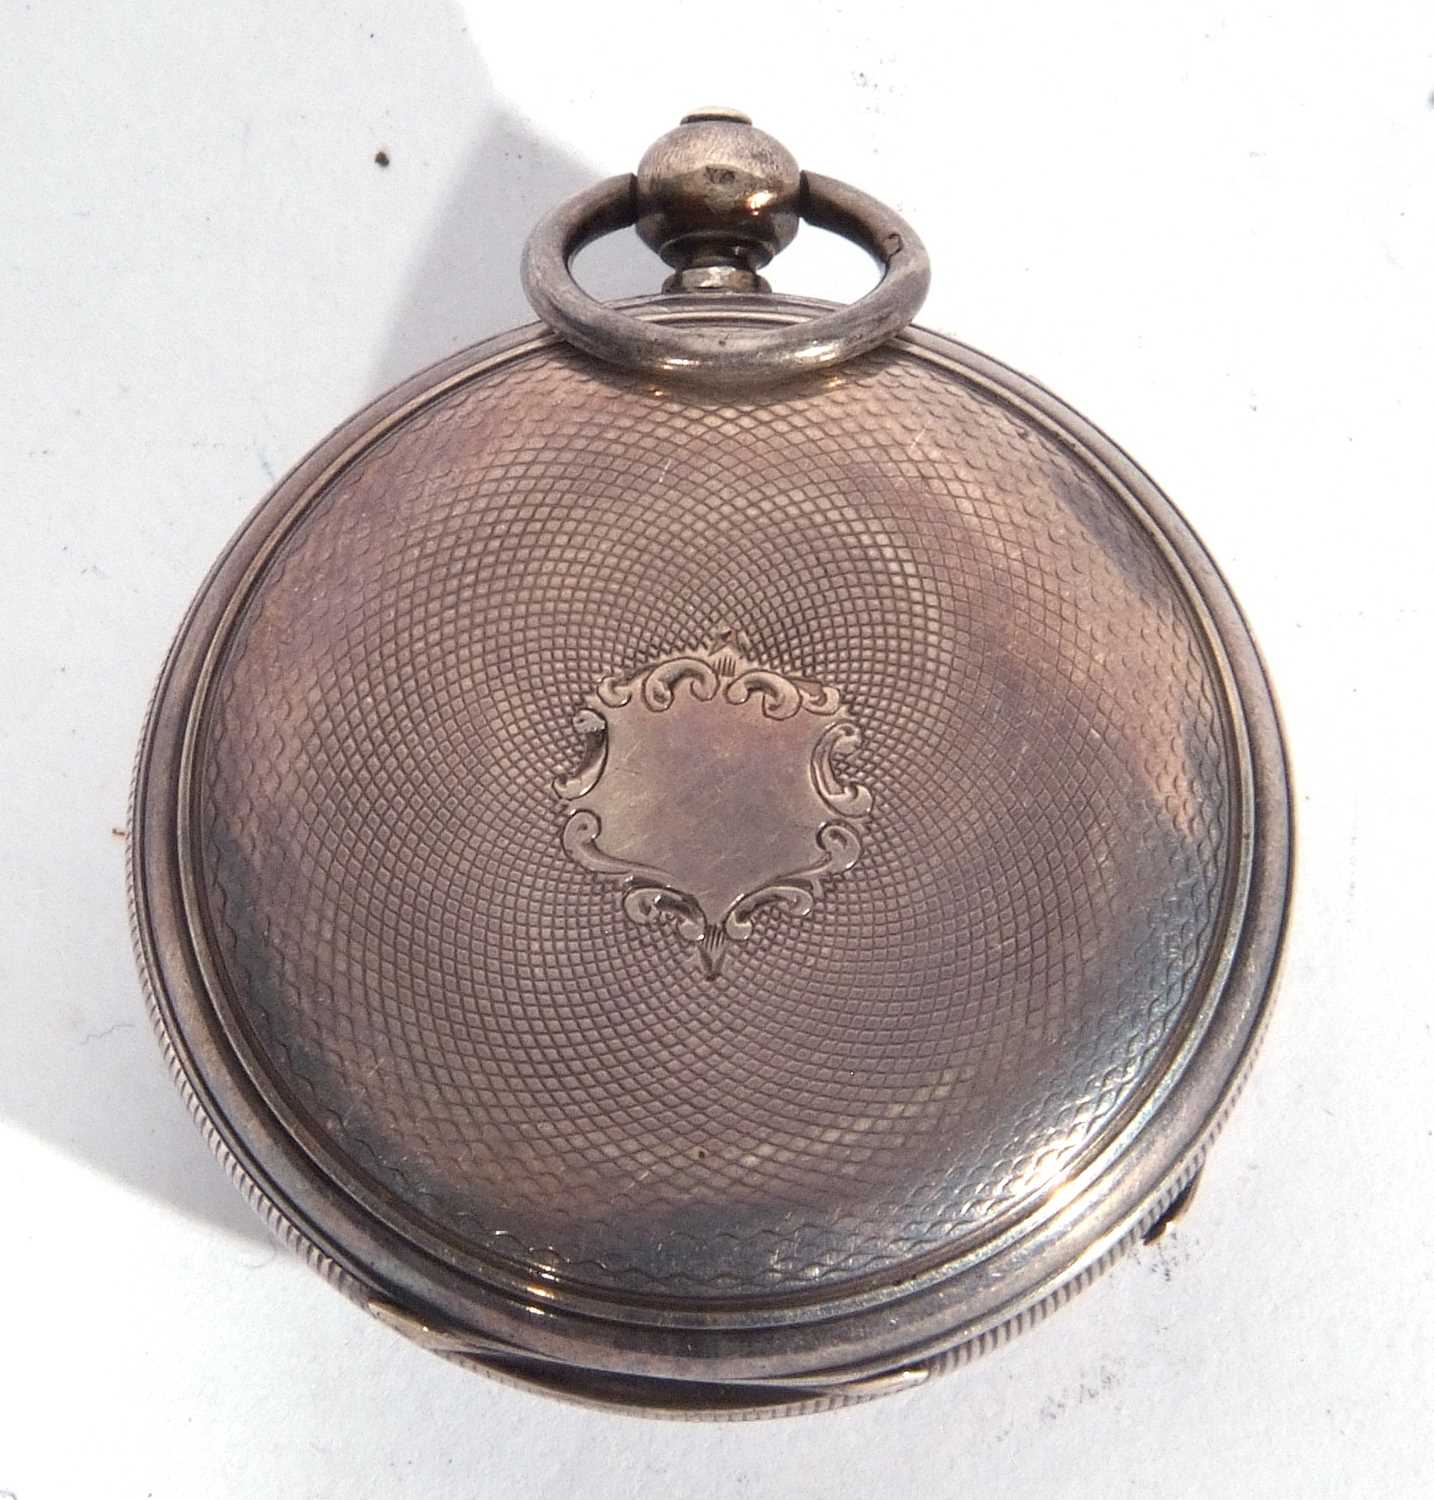 Silver pocket watch with white enamel dial, featuring a sub-second dial and Roman numeral hour - Image 2 of 2